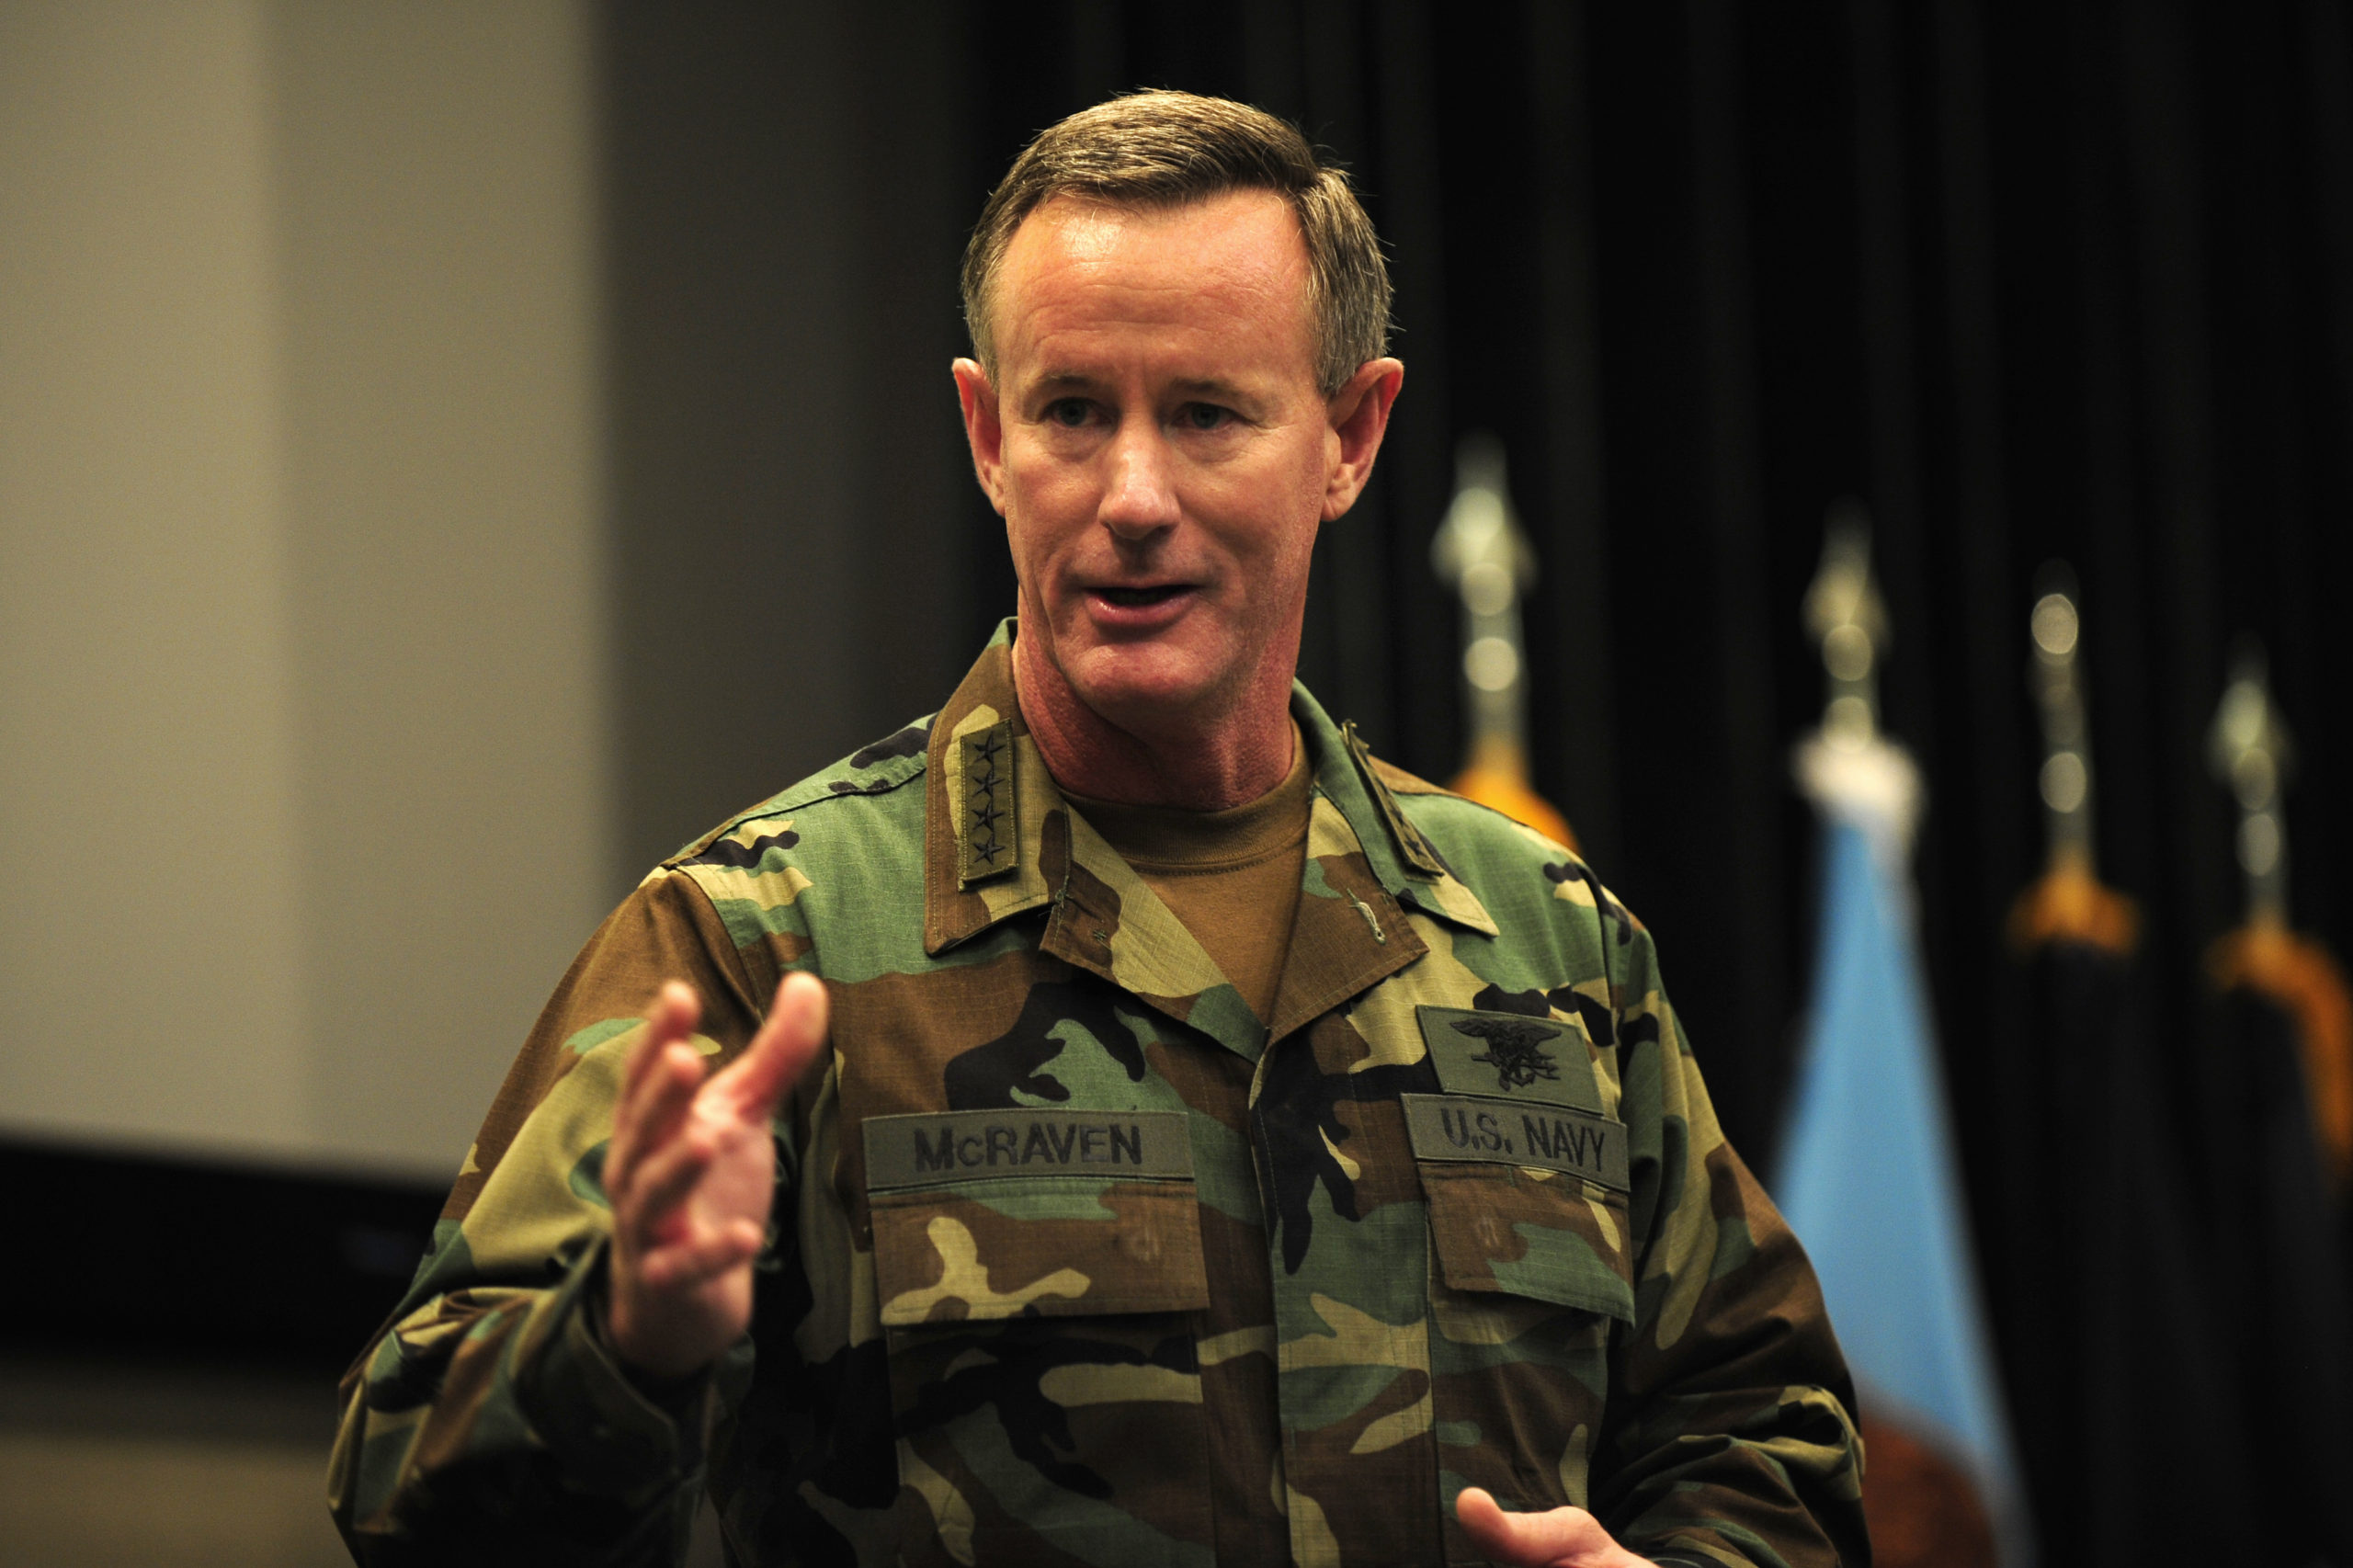 Admiral William McRaven's 2014 Commencement Address at the University of Texas